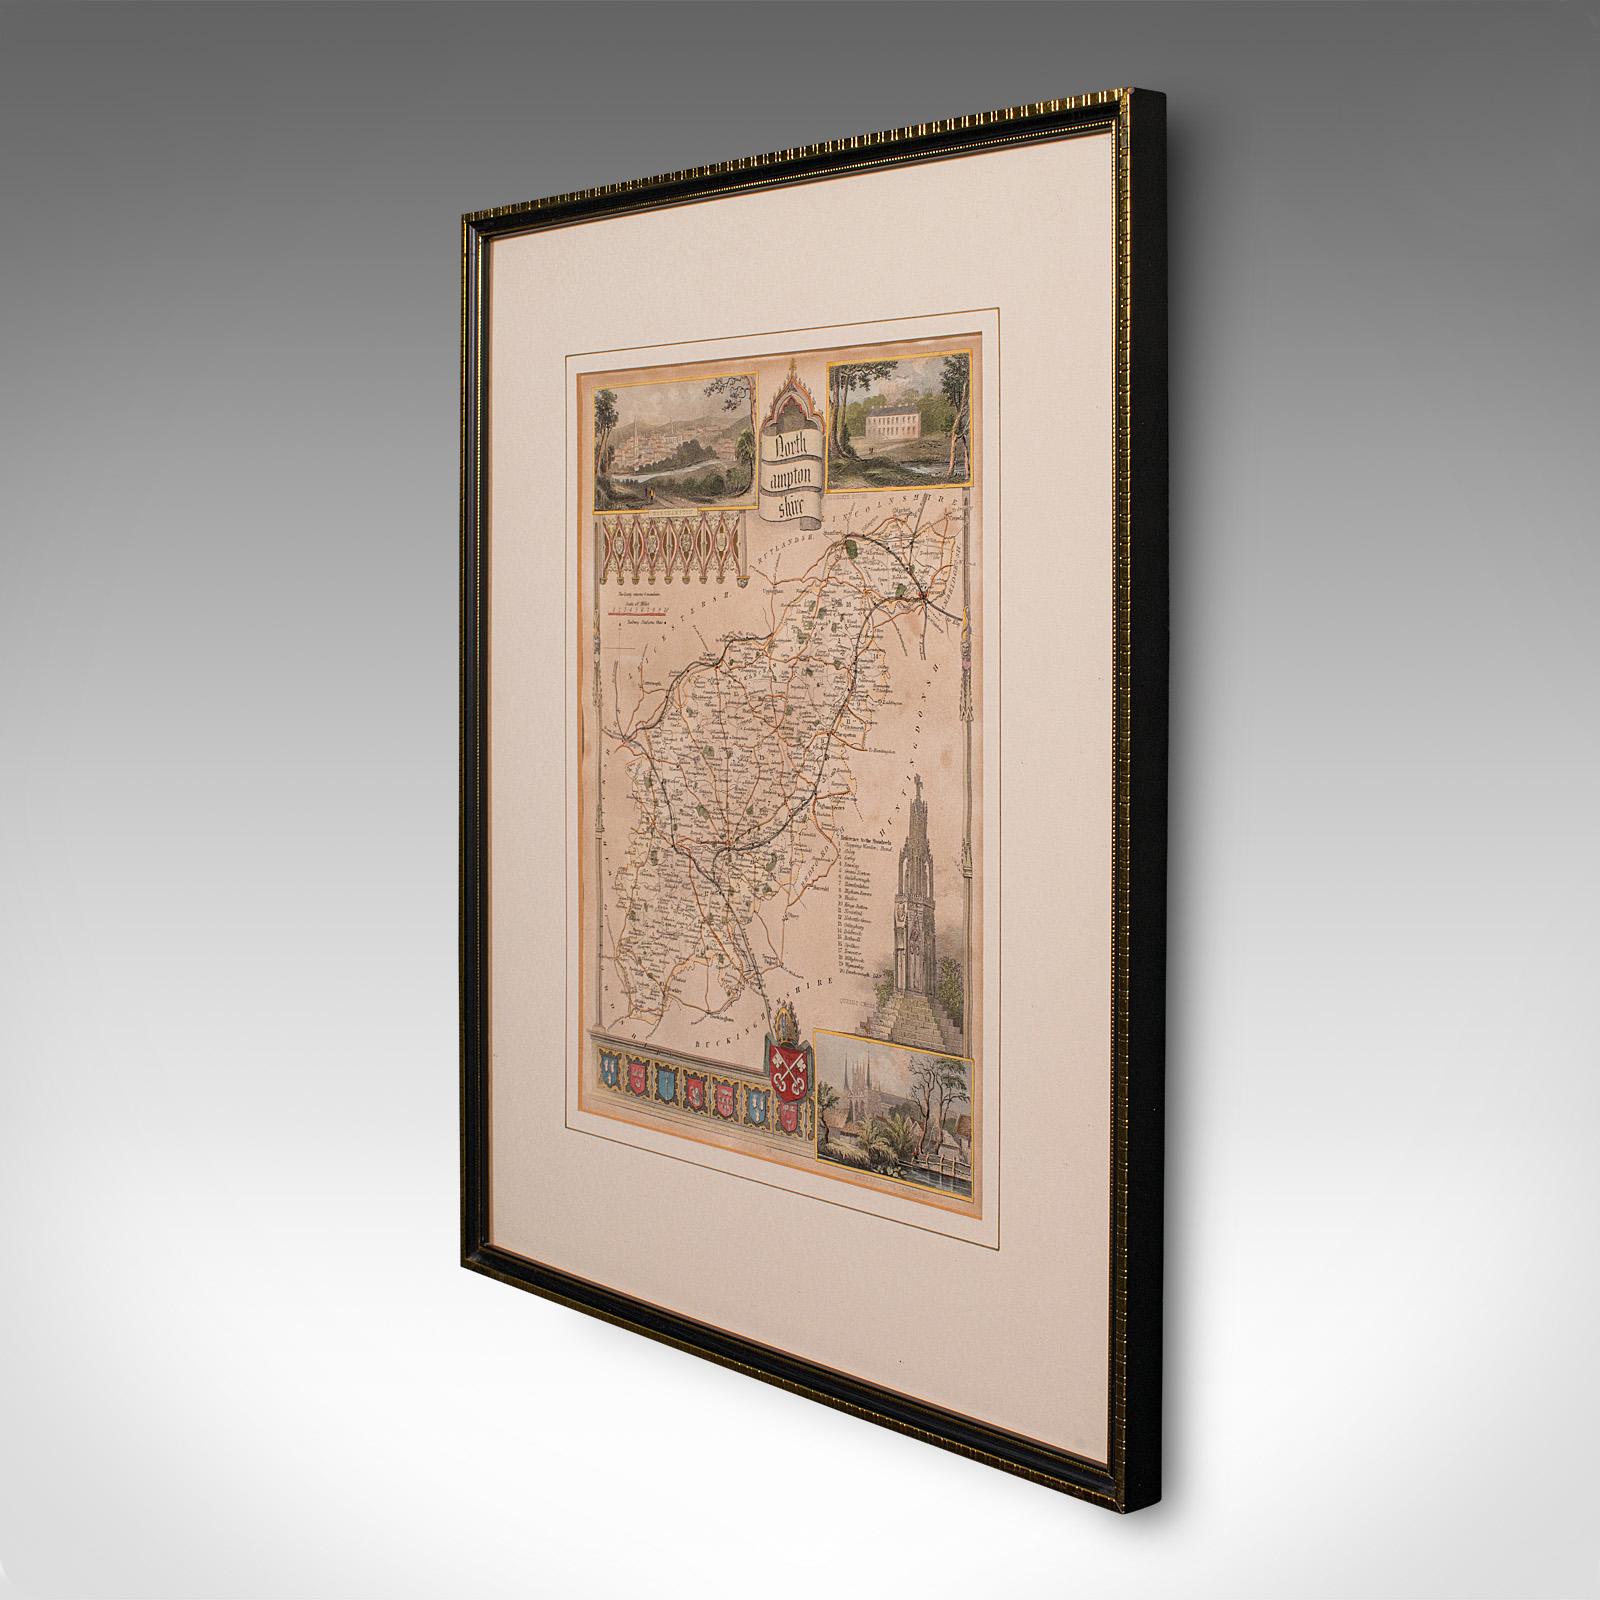 Victorian Antique Lithography Map, Hertfordshire, English, Framed Engraving, Cartography For Sale